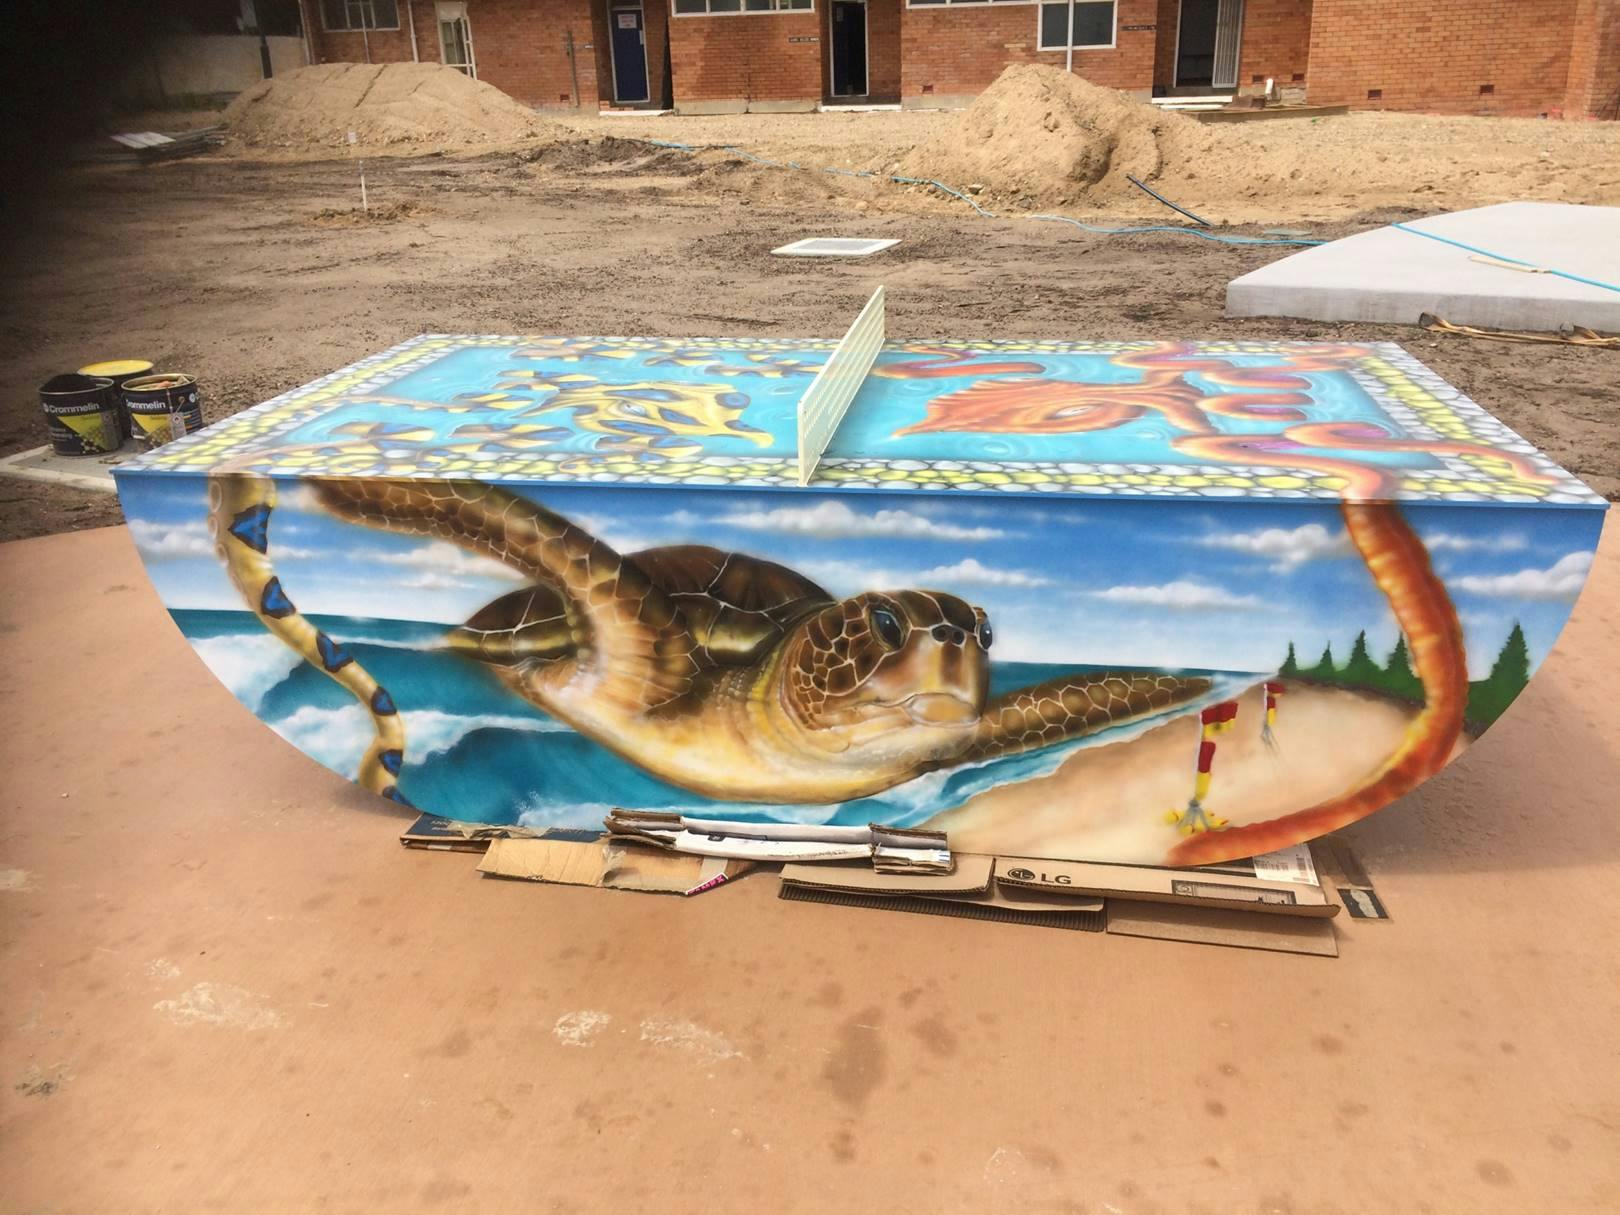 A new table tennis table in the central park features an amazing mural by Tweed artist Tony Lawrence.